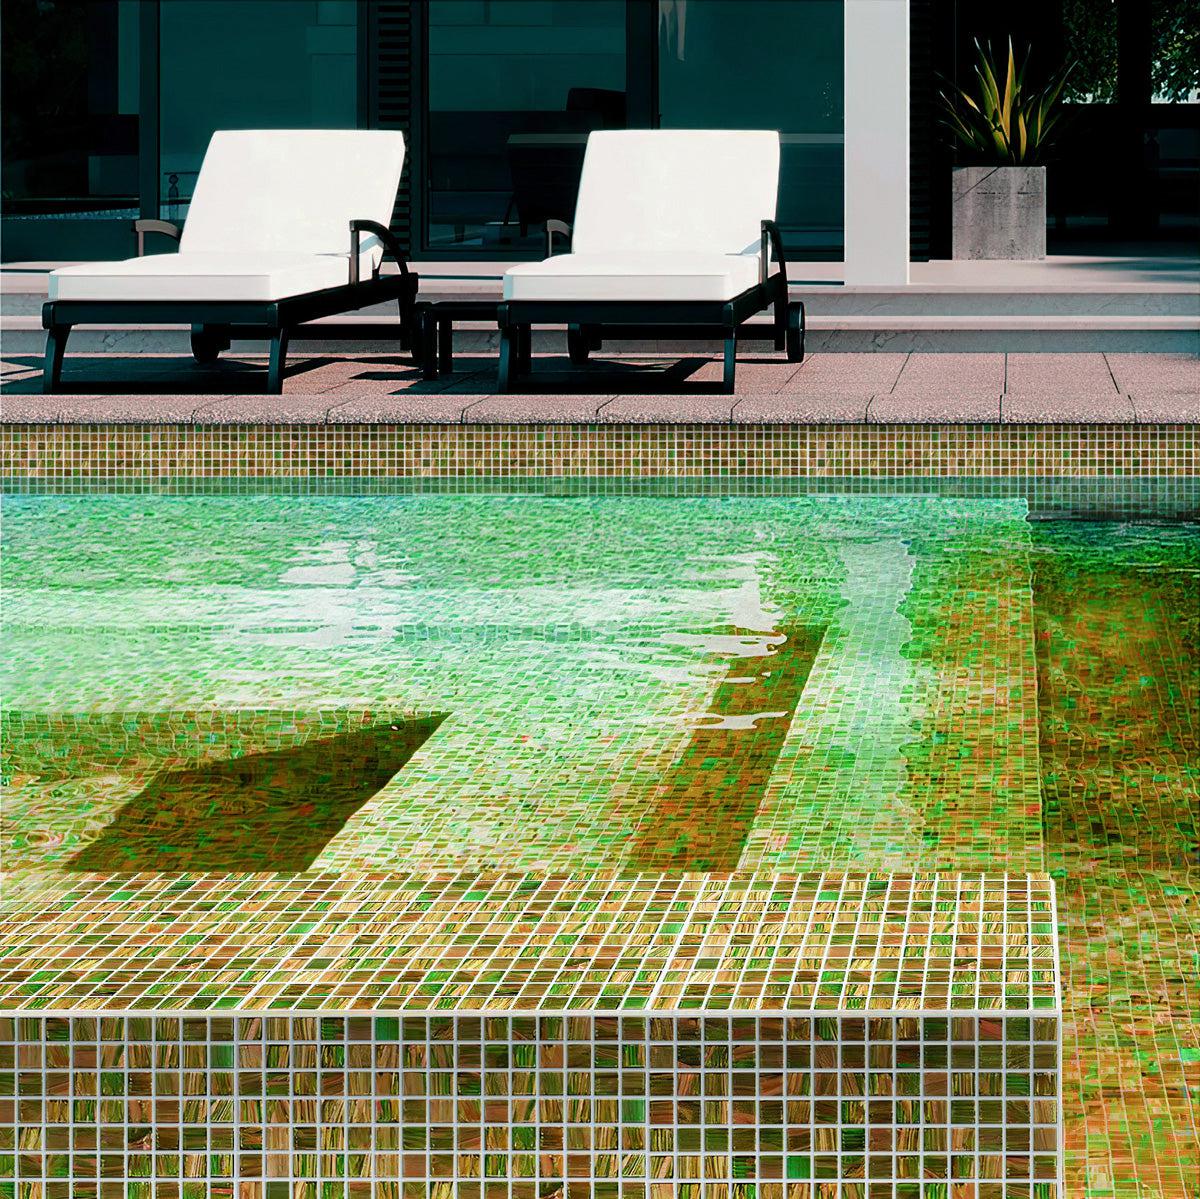 Outdoor Pool with Walls Finished in Camo Green & Brown Squares Glass Pool Tile